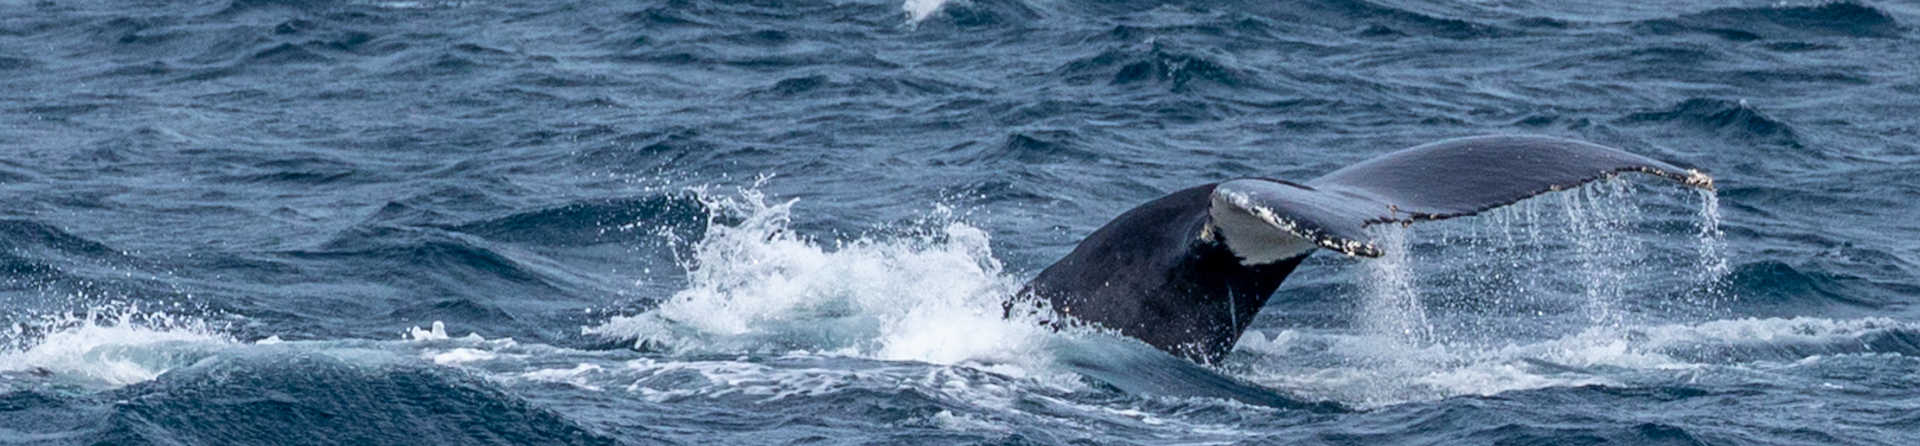 Where can I see whales in Phillip Island?